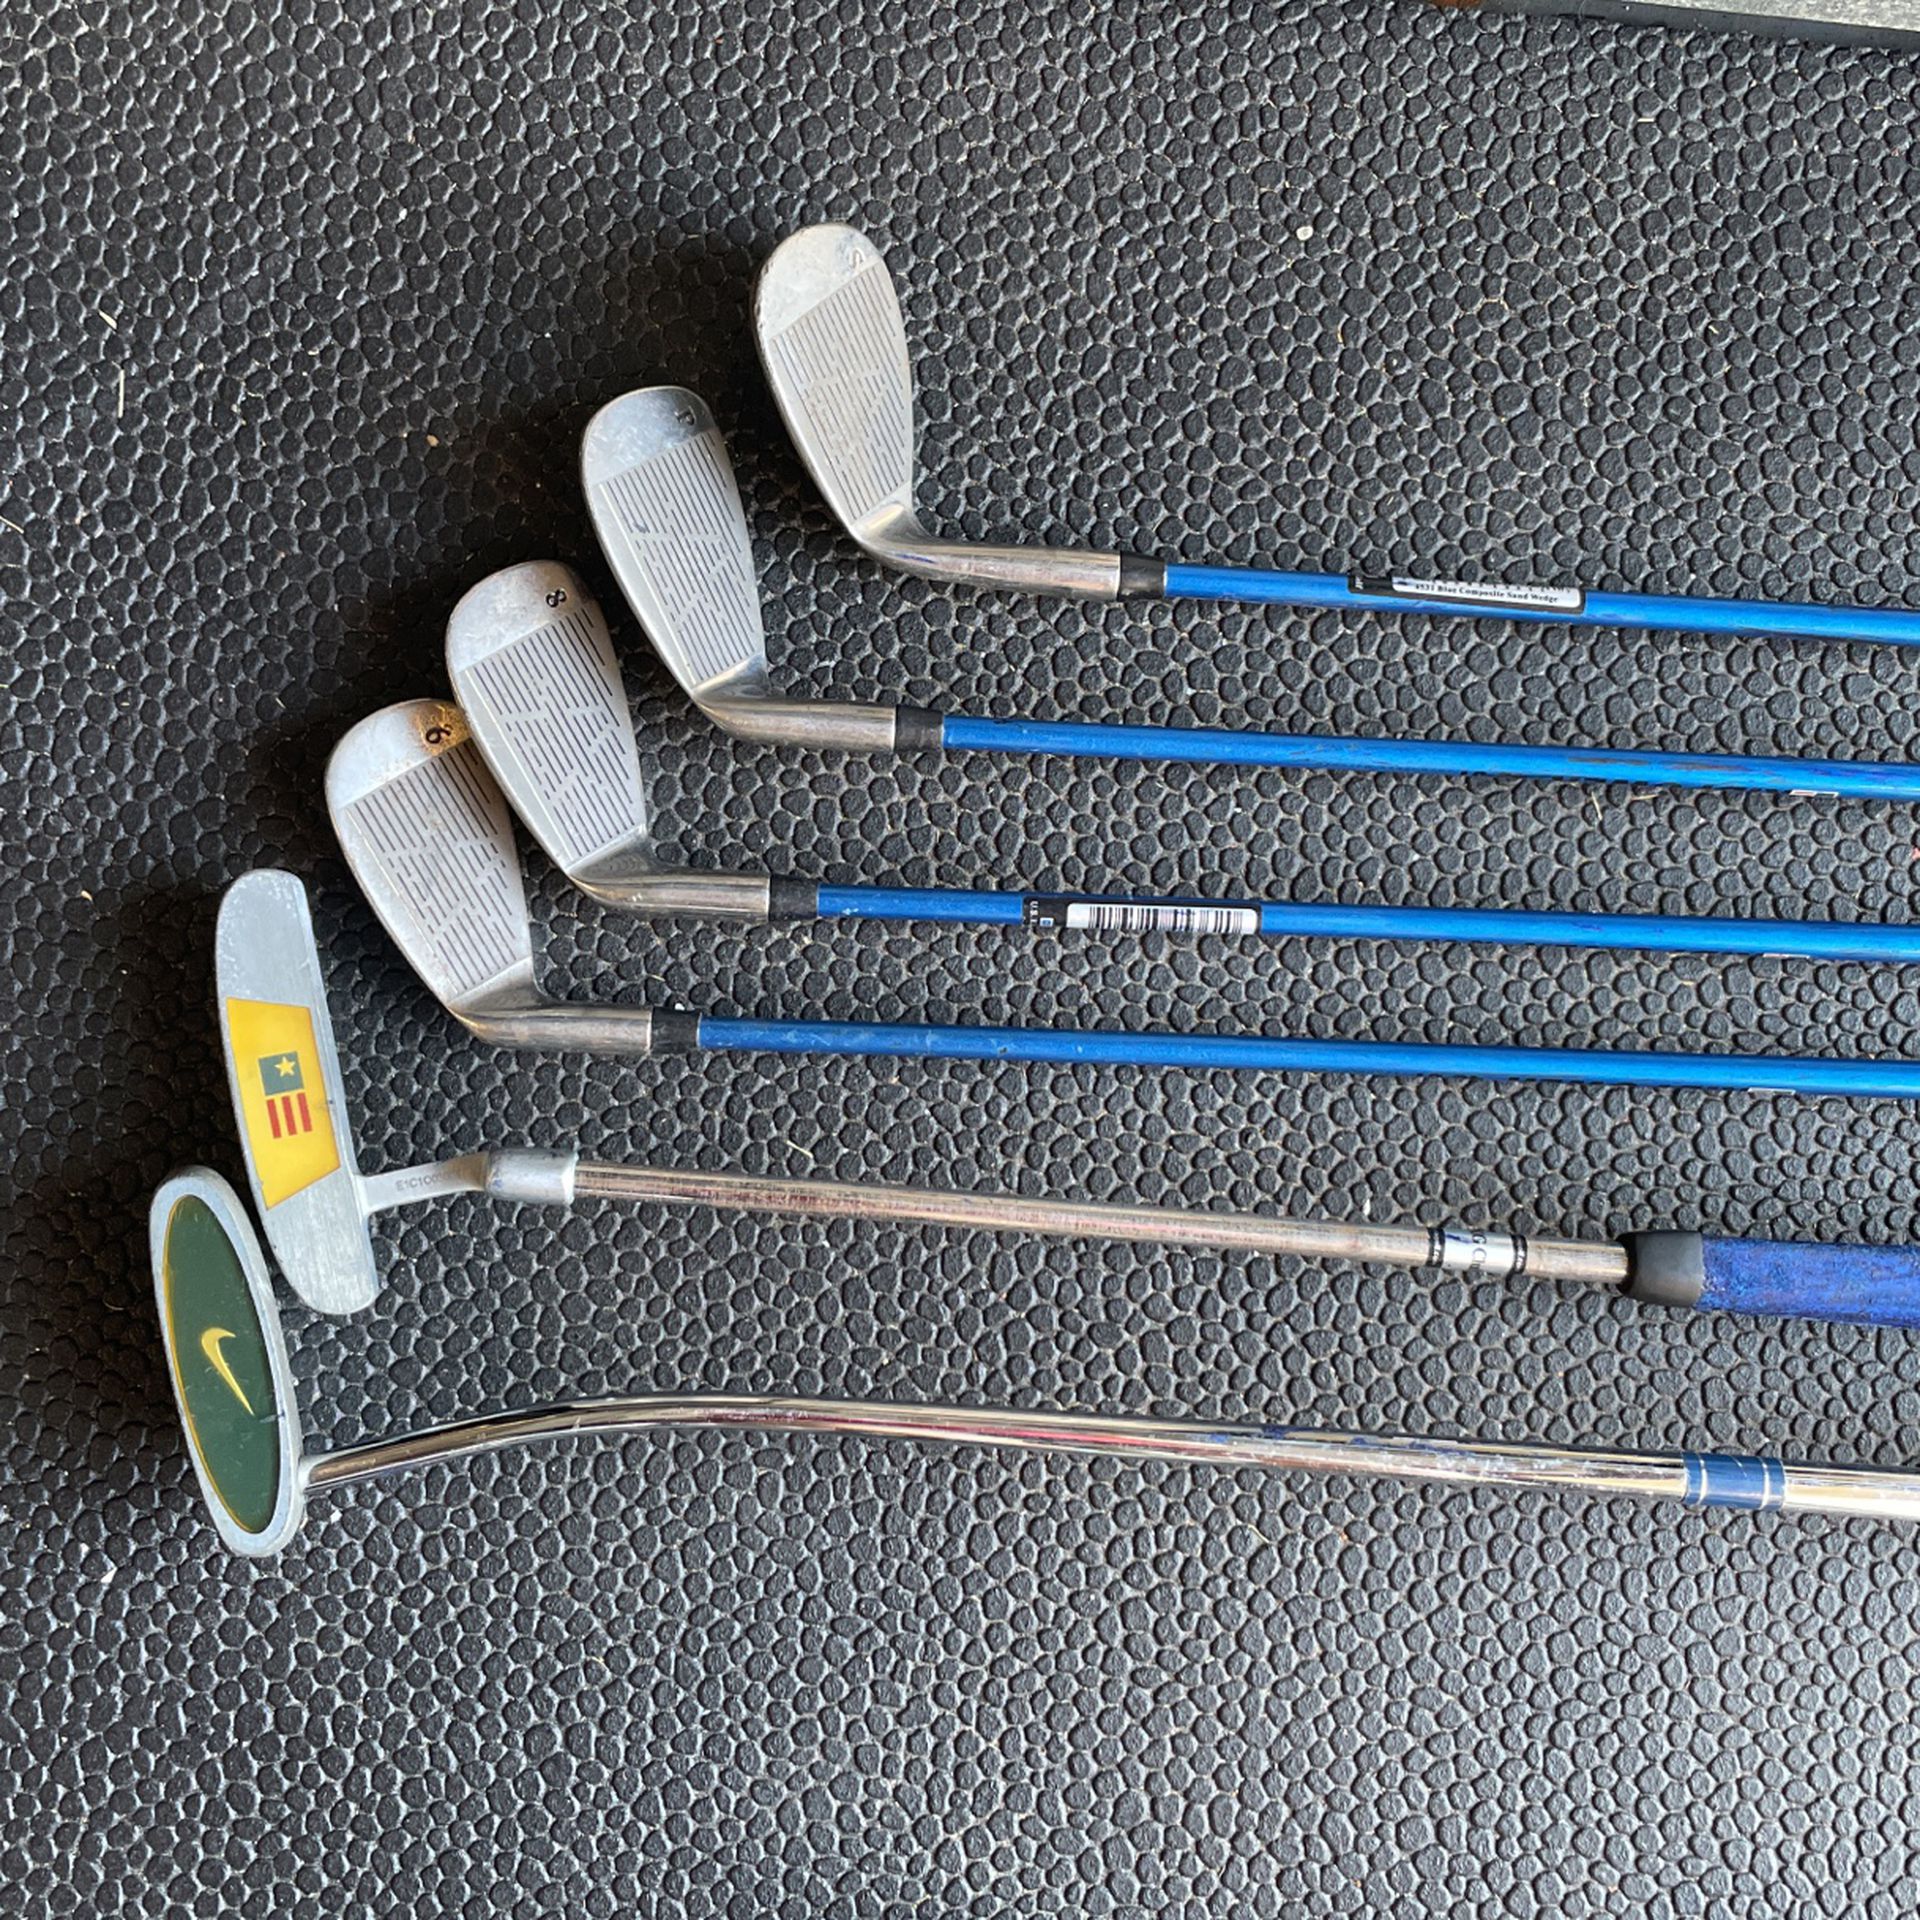 Free - Golf Clubs For A Young Child